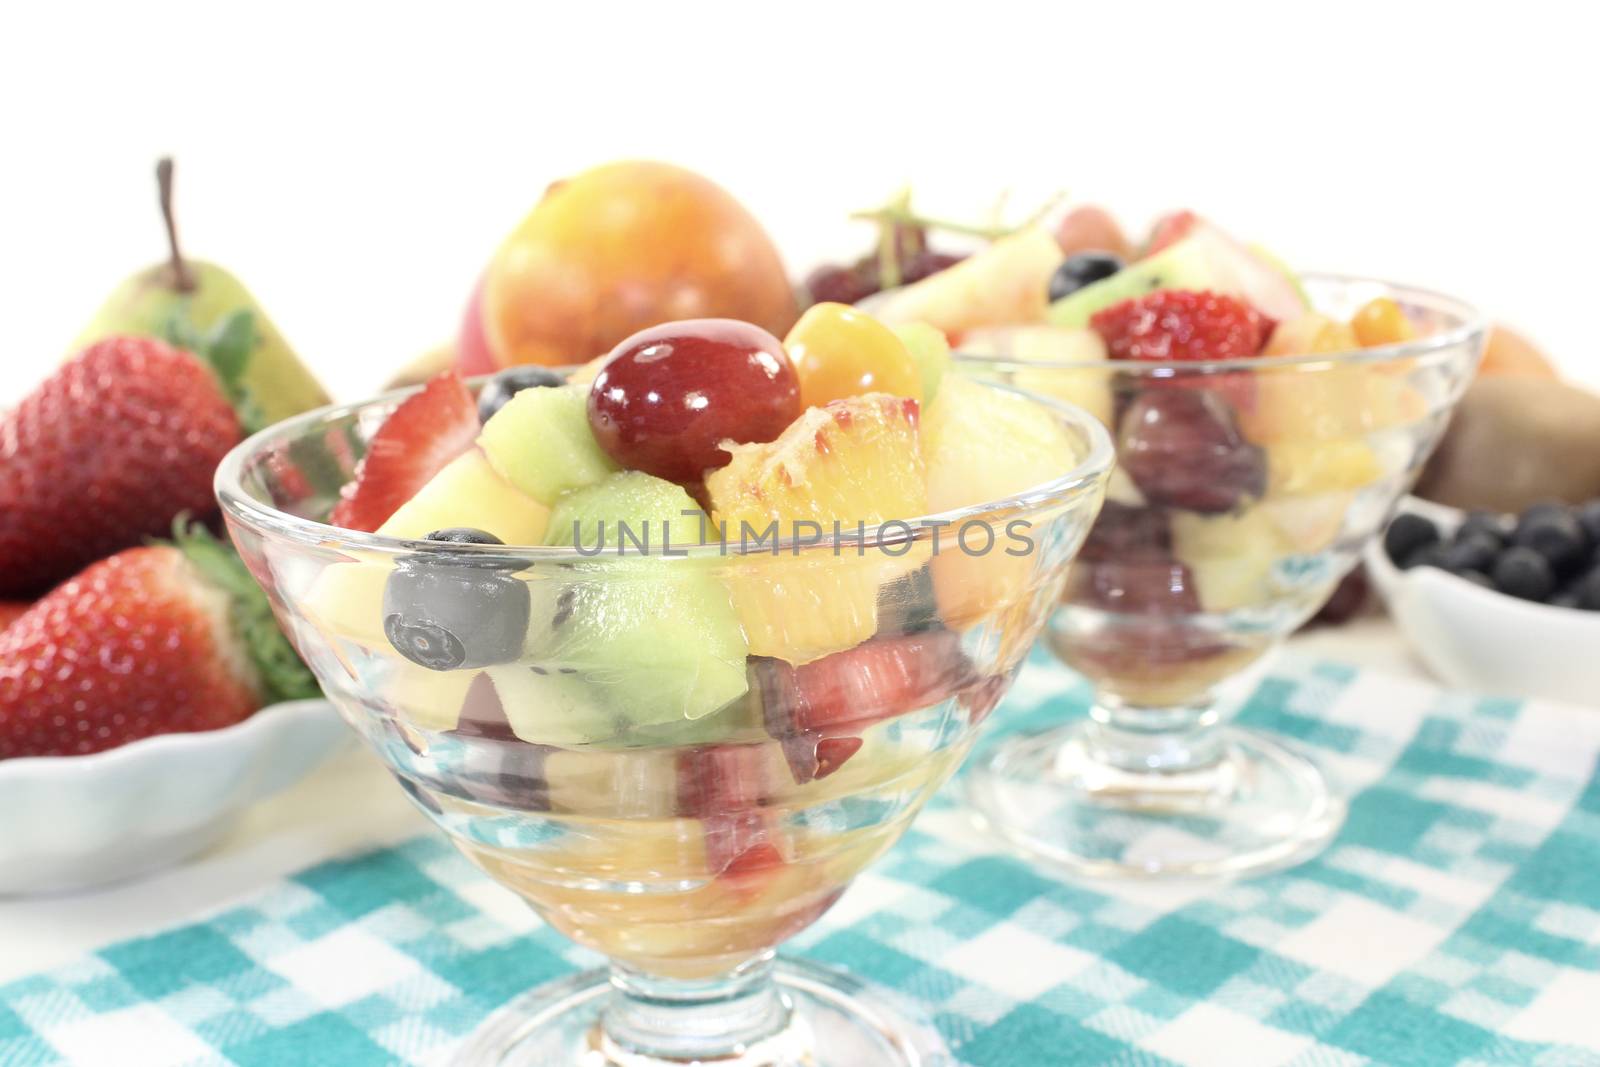 Fruit salad in a bowl on checkered napkin before light background